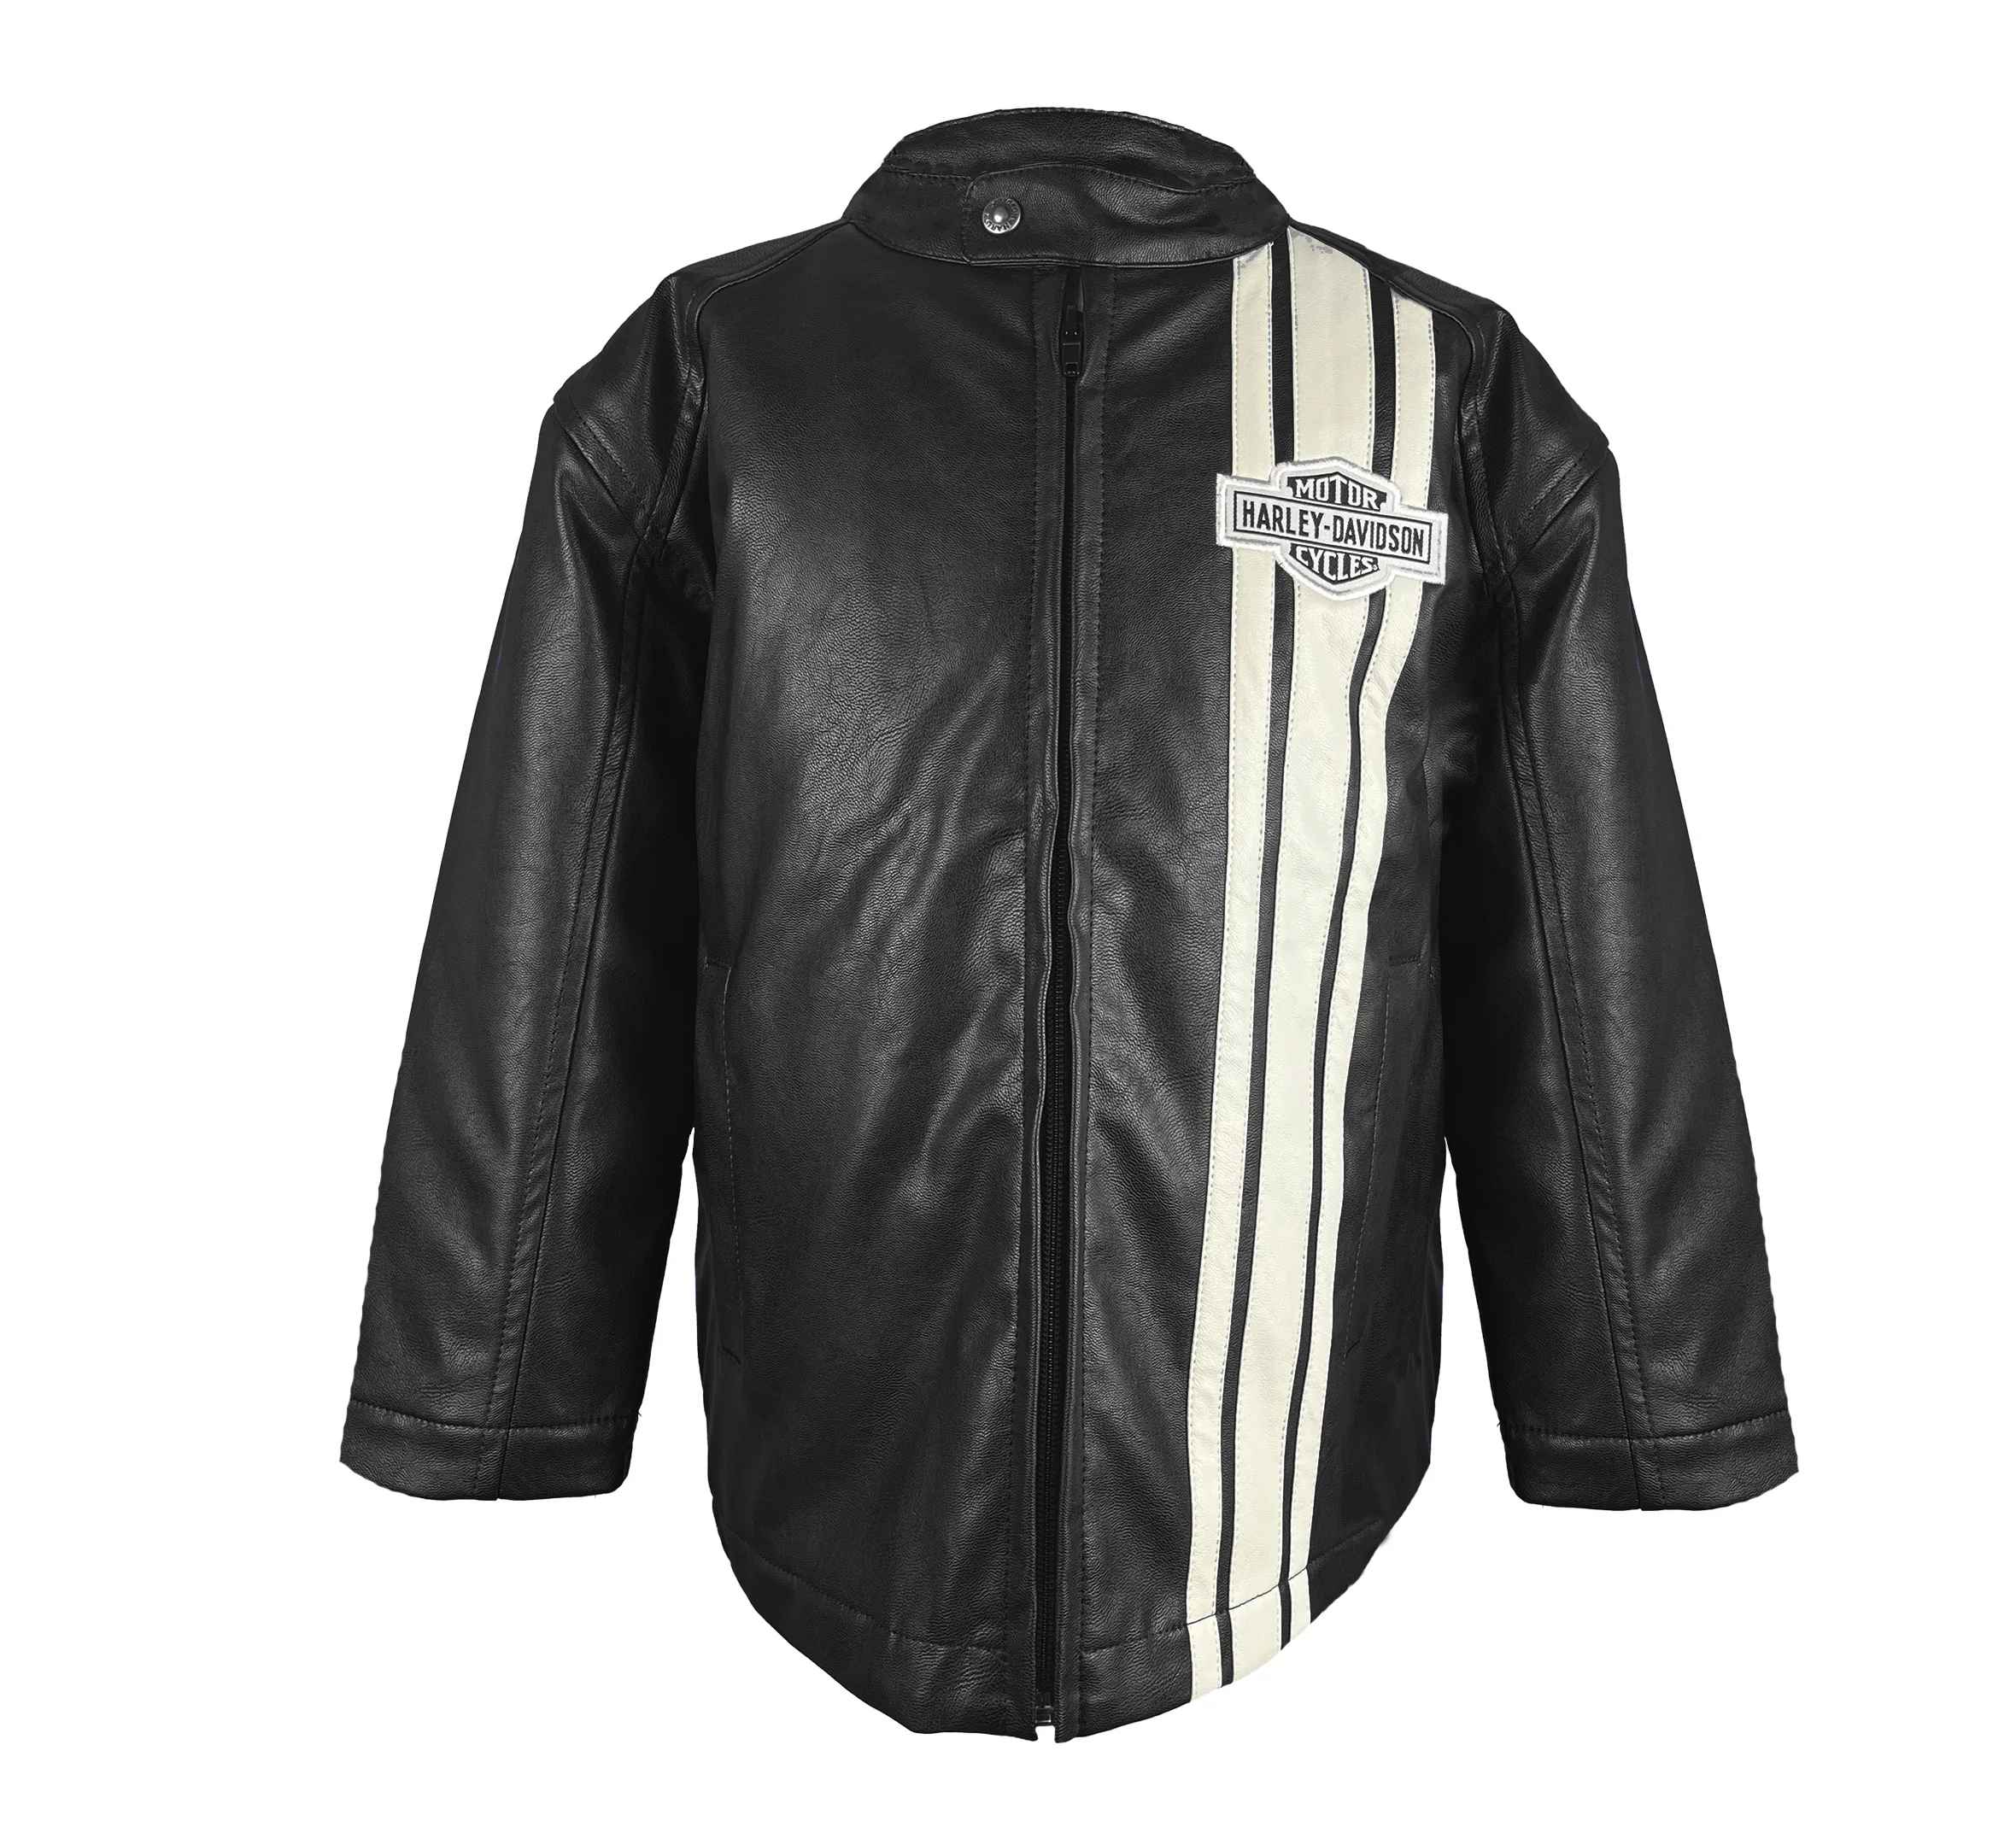 Women's Genuine Lambskin Leather Applique Mesh Jacket Made by Handmade at   Women's Coats Shop